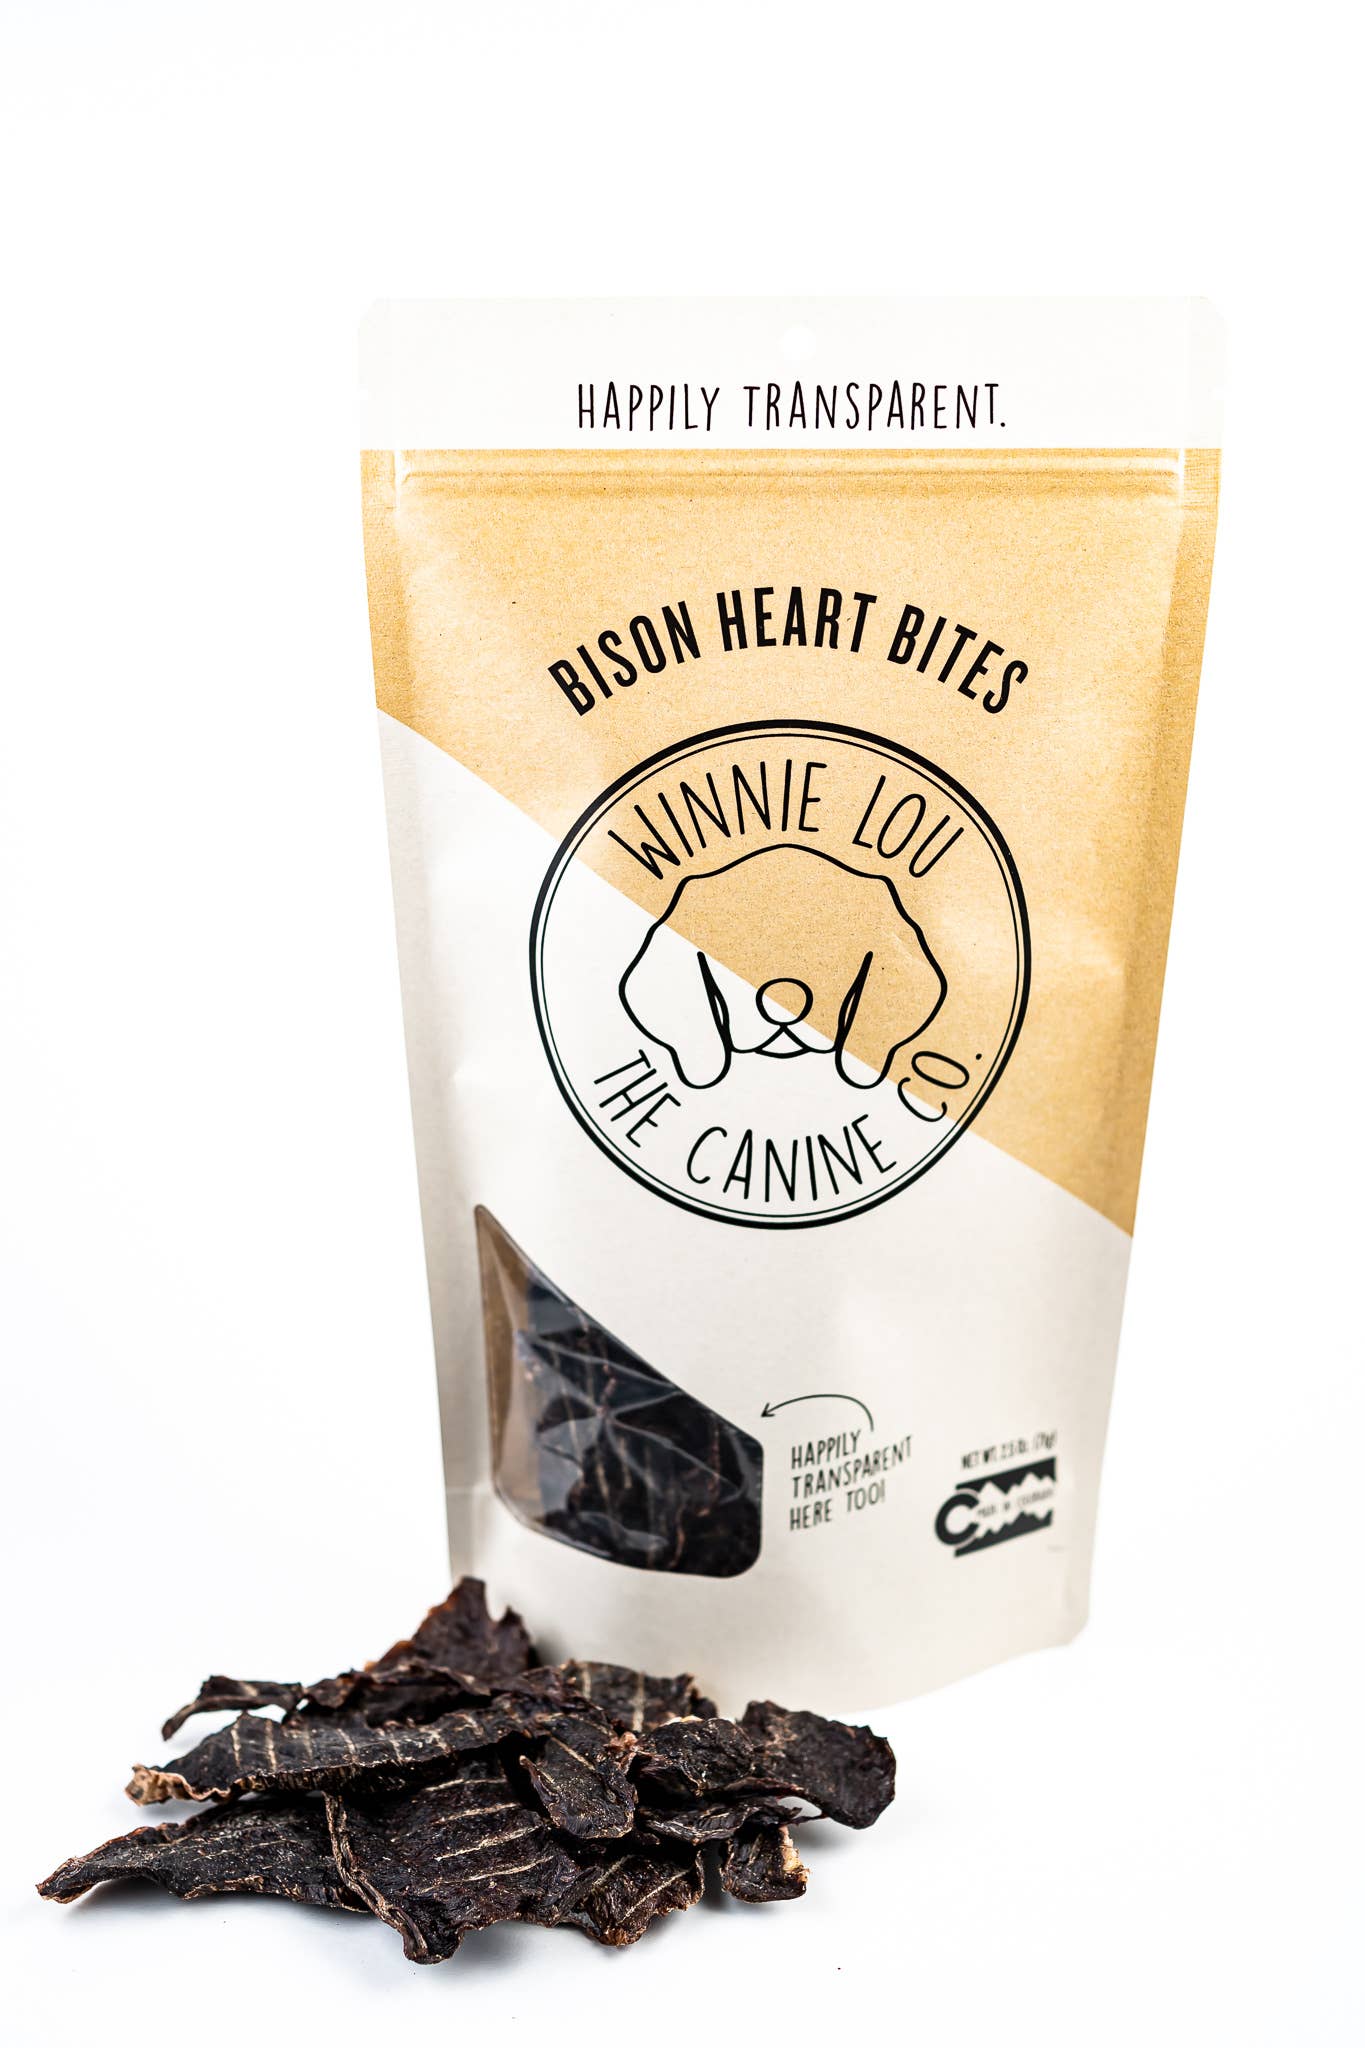 Winnie Lou - The Canine Co. - Bison Heart Bites